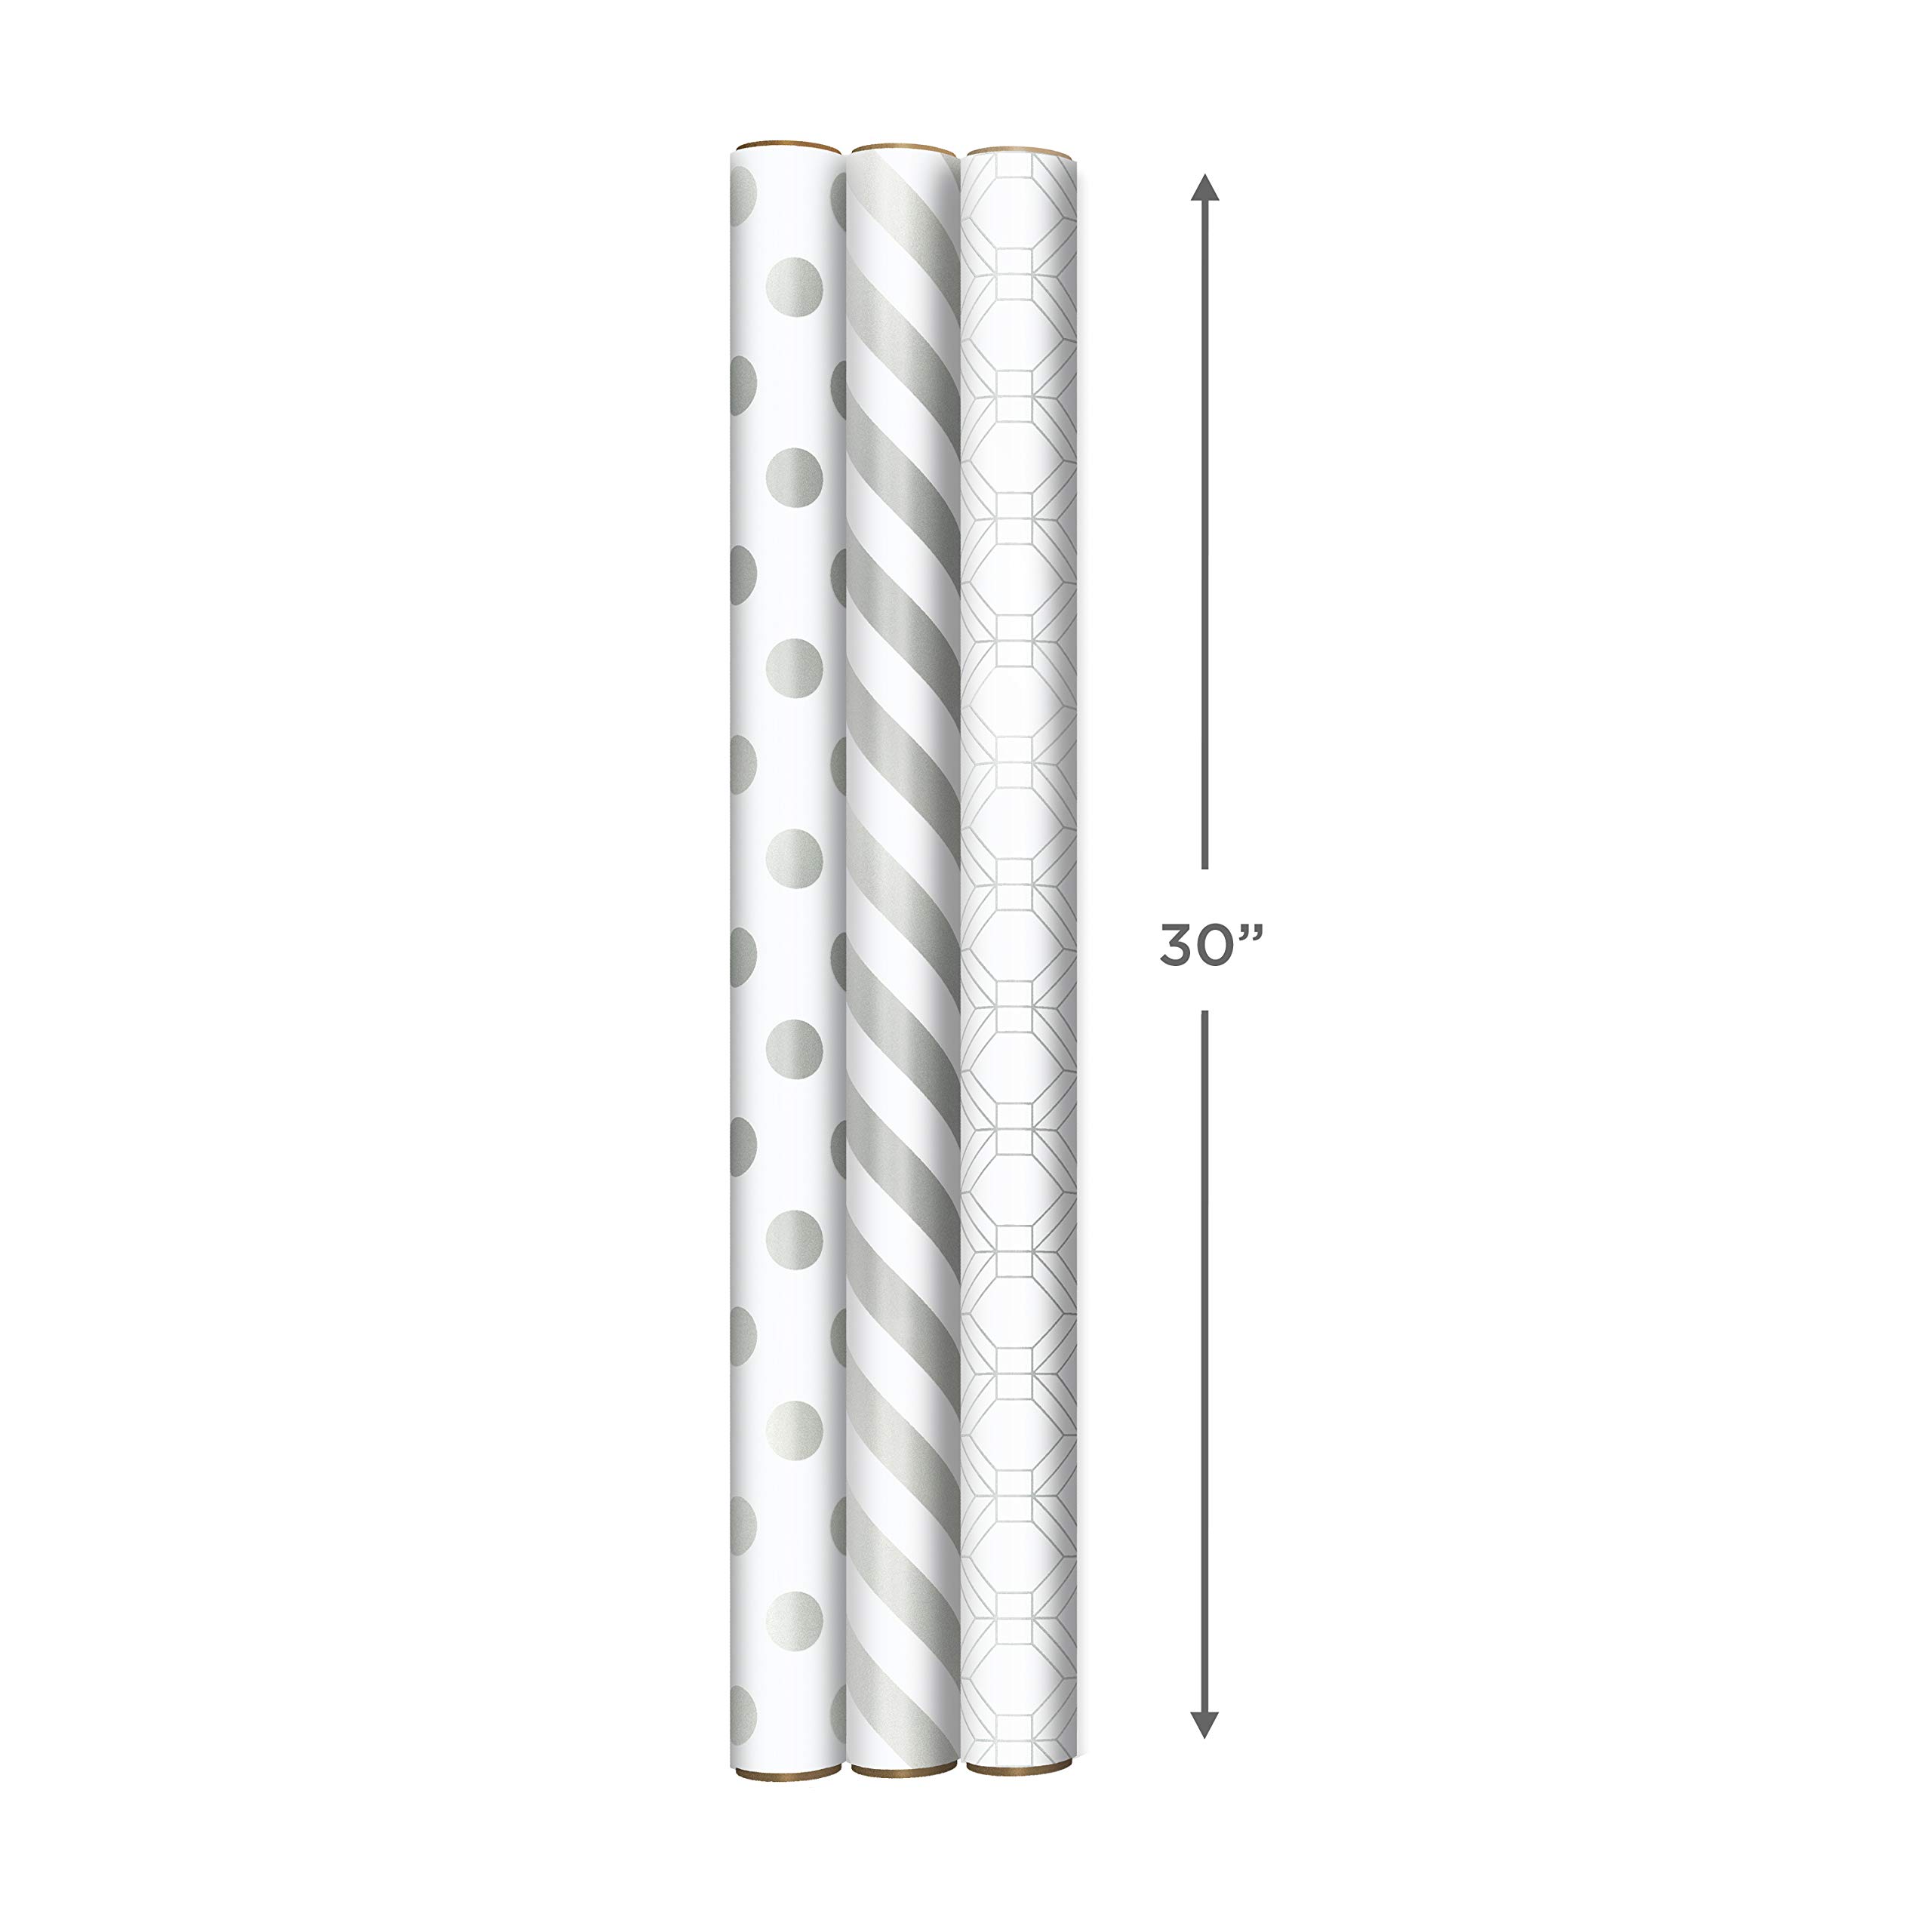 Hallmark Silver Wrapping Paper with Cut Lines on Reverse (3-Pack: 105 sq. ft. ttl) for Weddings, Christmas, Hanukkah, Bridal Showers, Birthdays